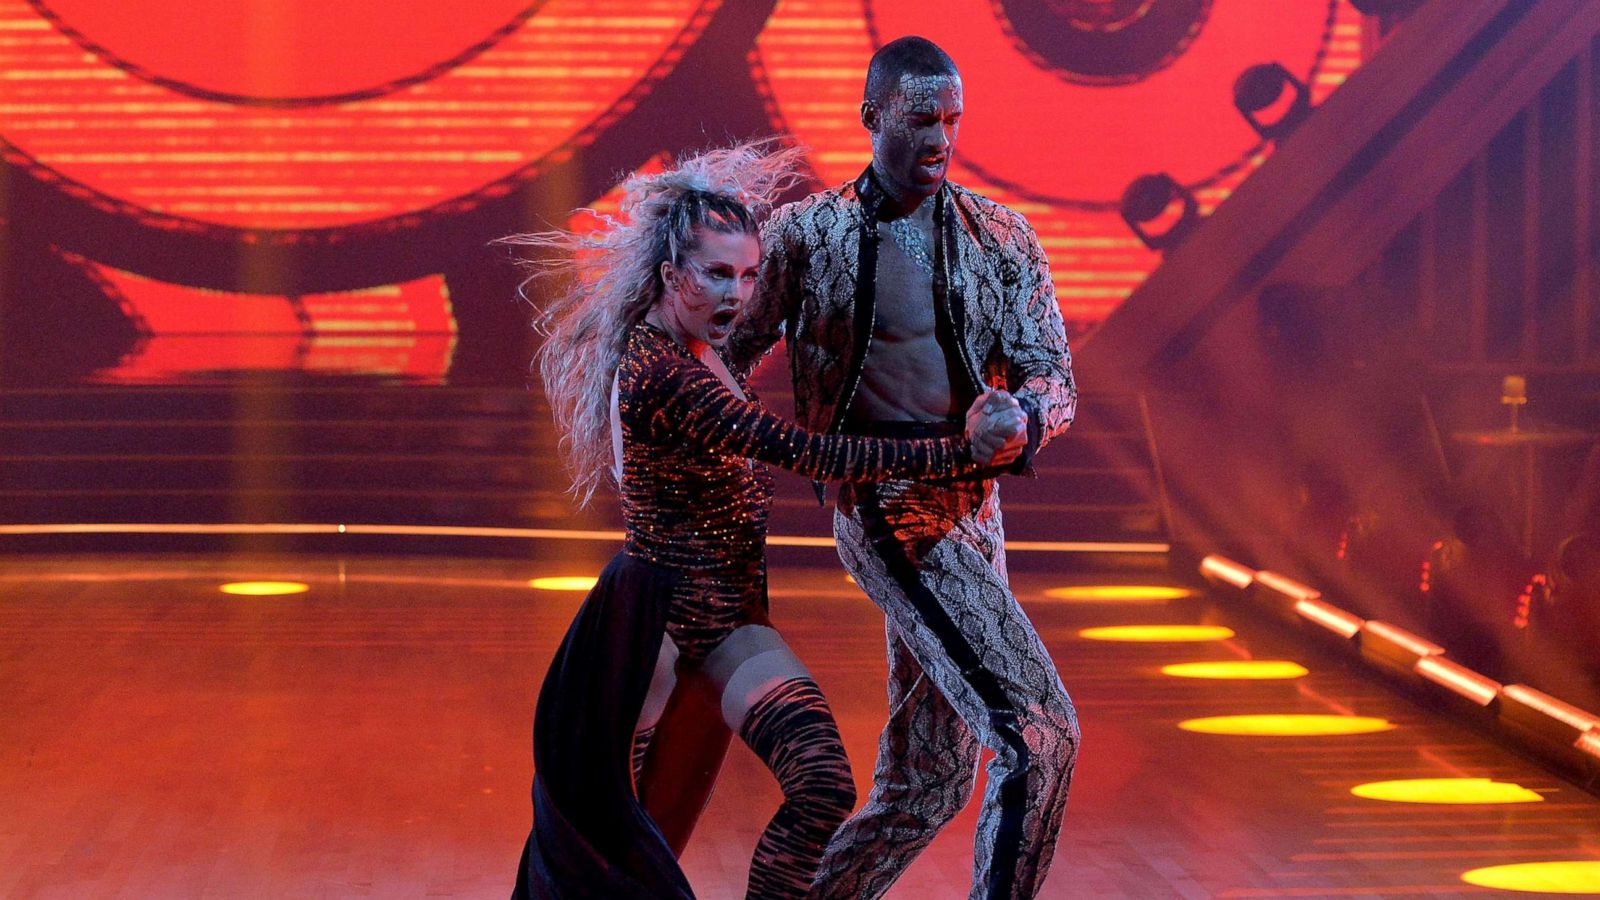 Iman Shumpert Hopes 'DWTS' Win Will Inspire Other NBA Players To